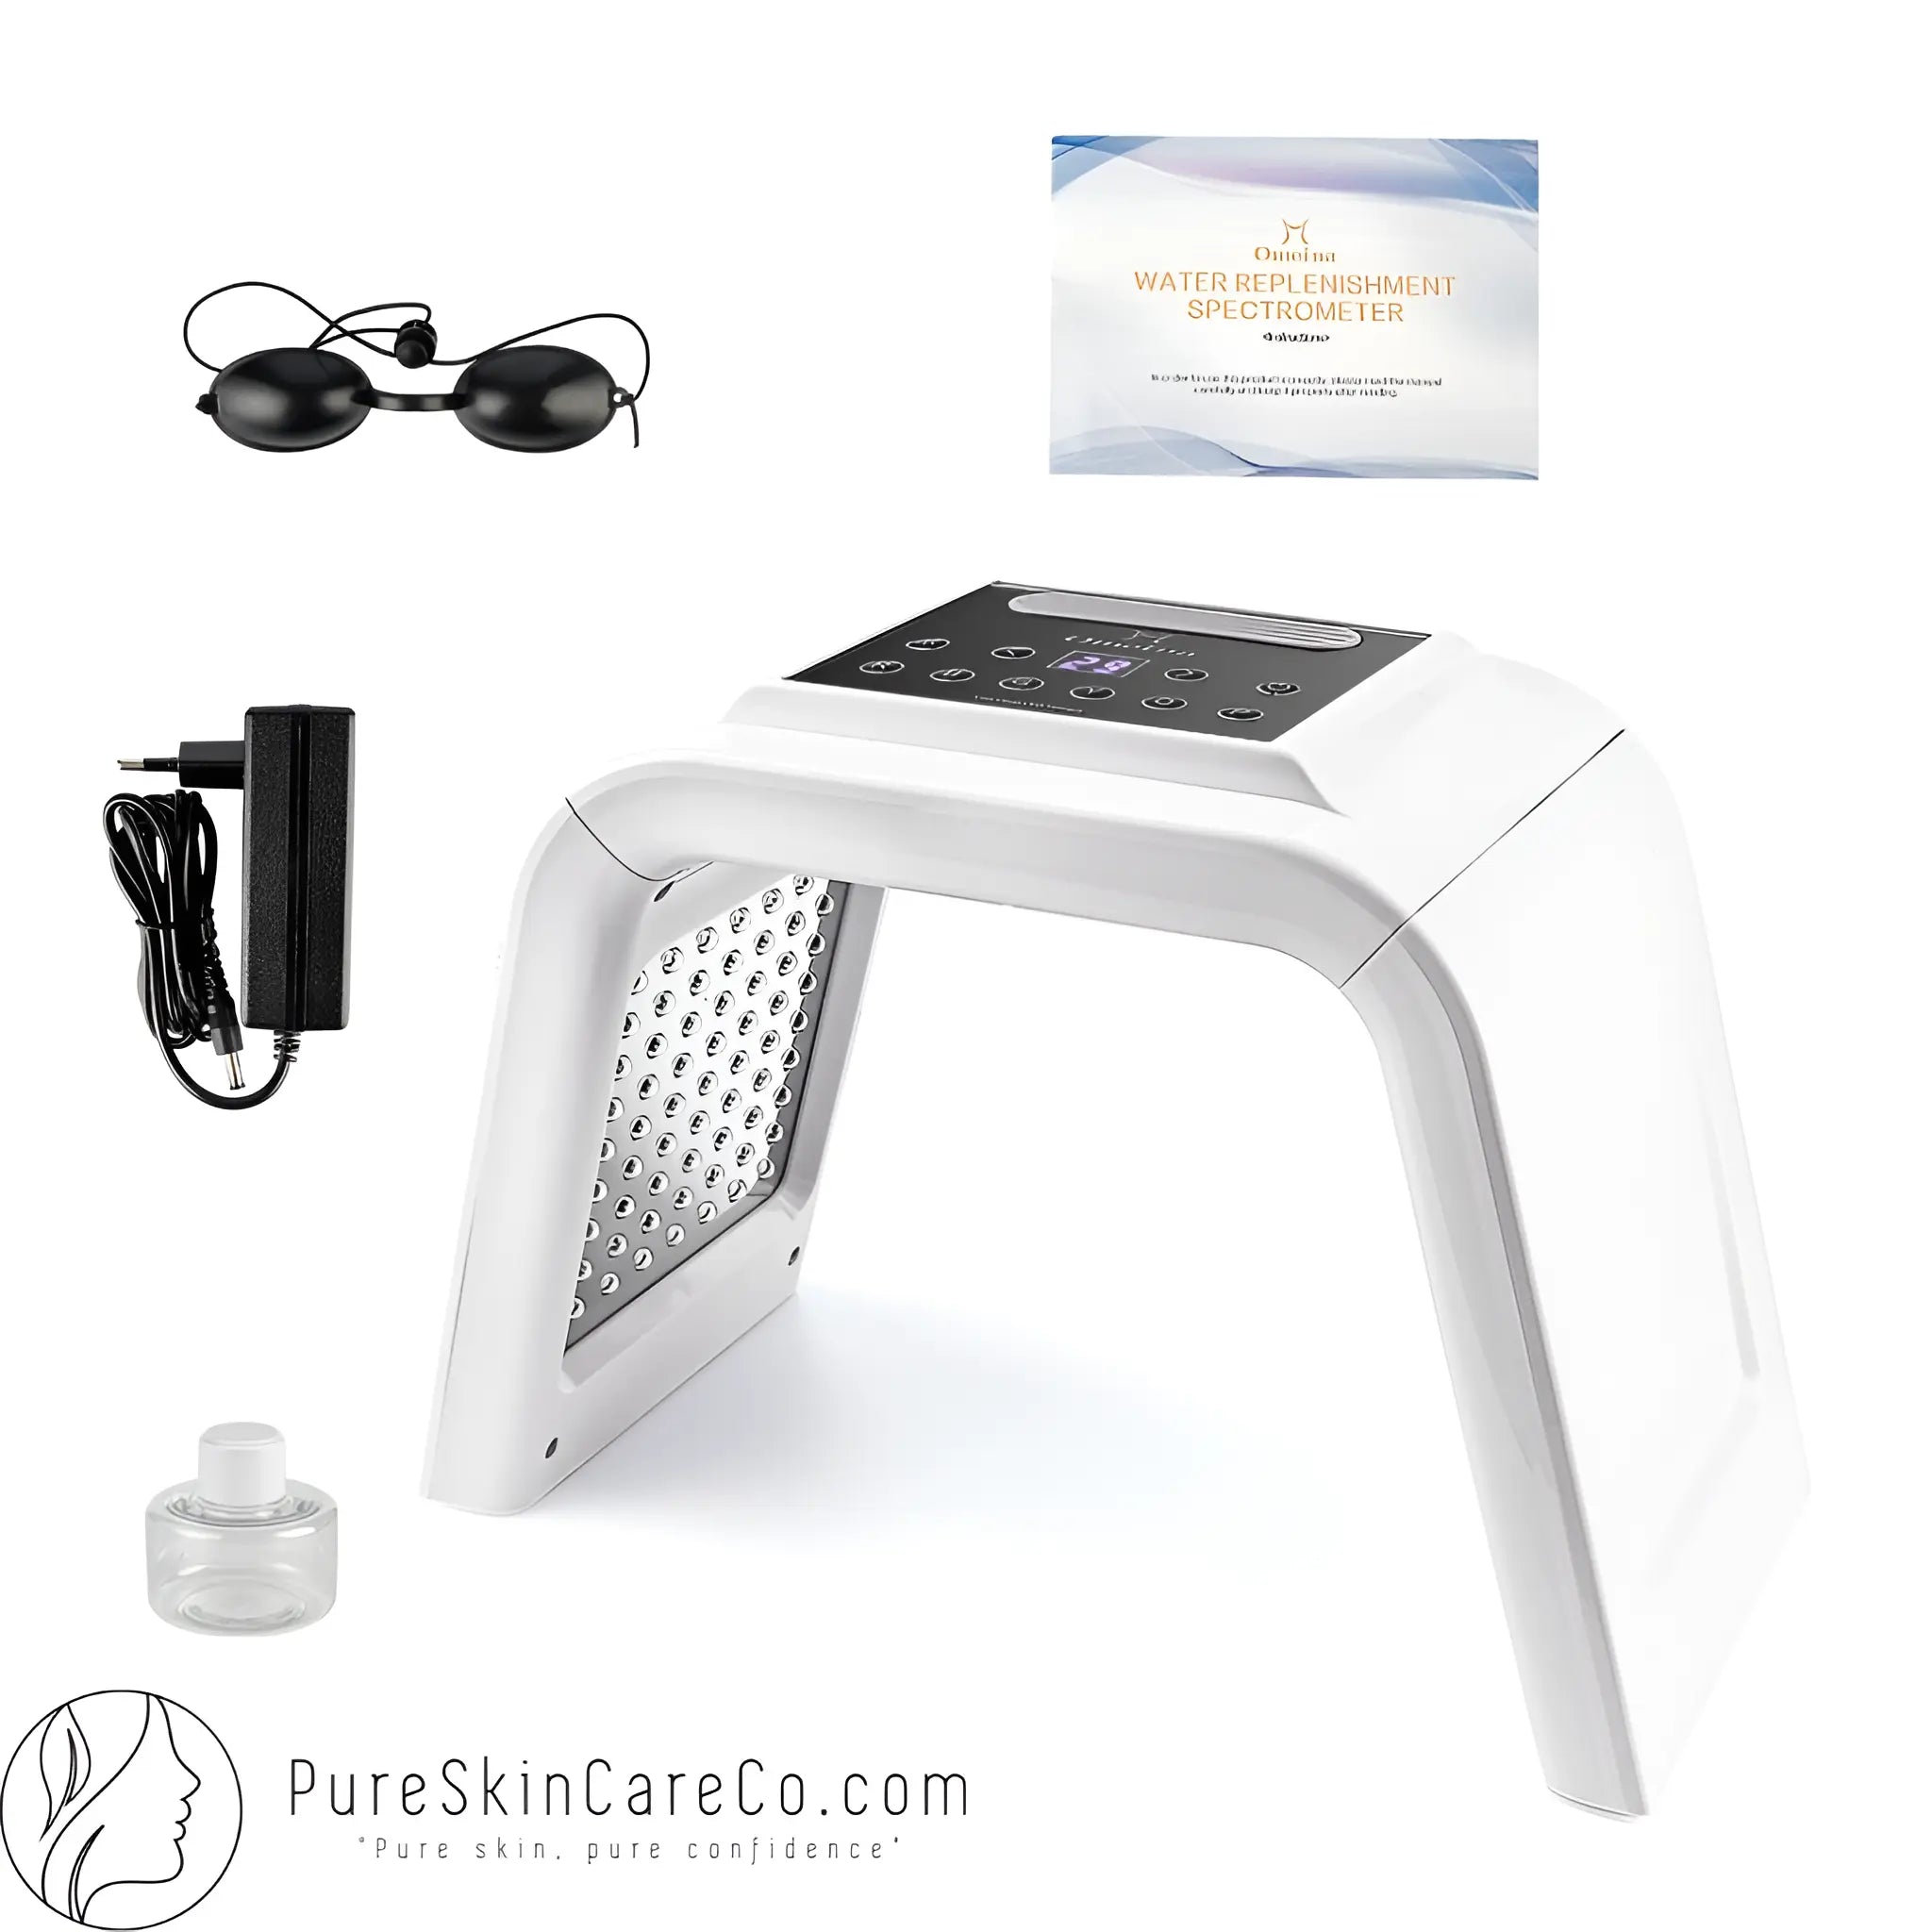 LED Therapy for Ageless Beauty 7-Spectrum Face Therapy Machine with Steamer